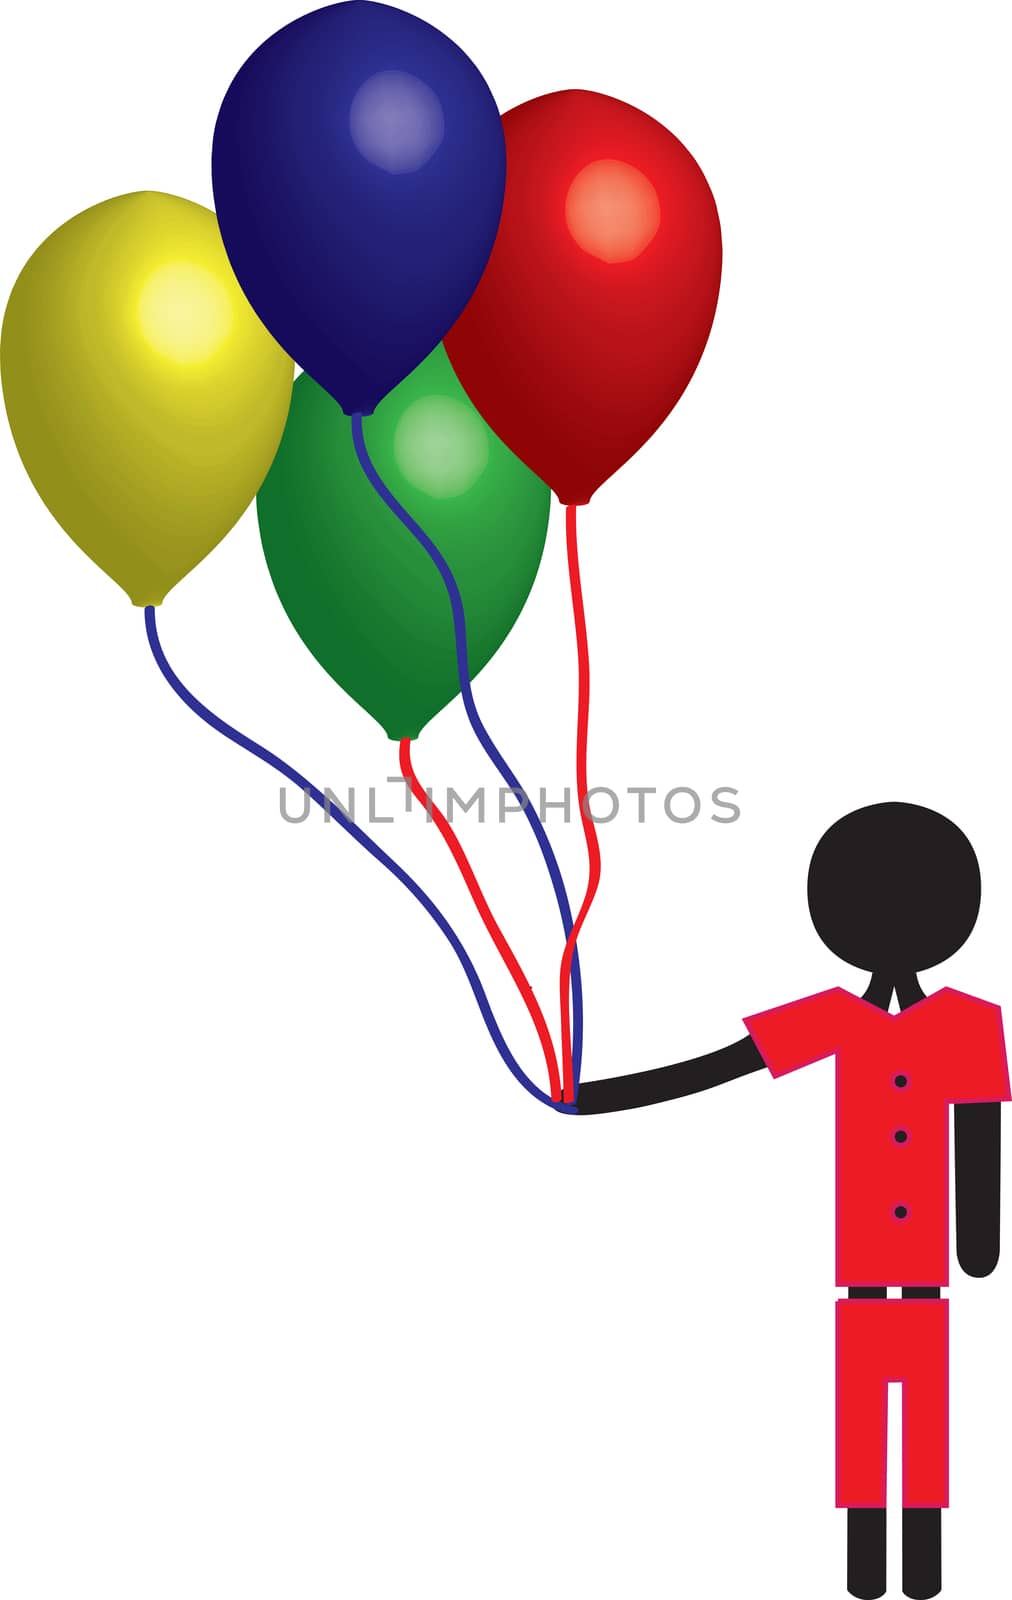 boy with balloons
in red blue yellow and green
